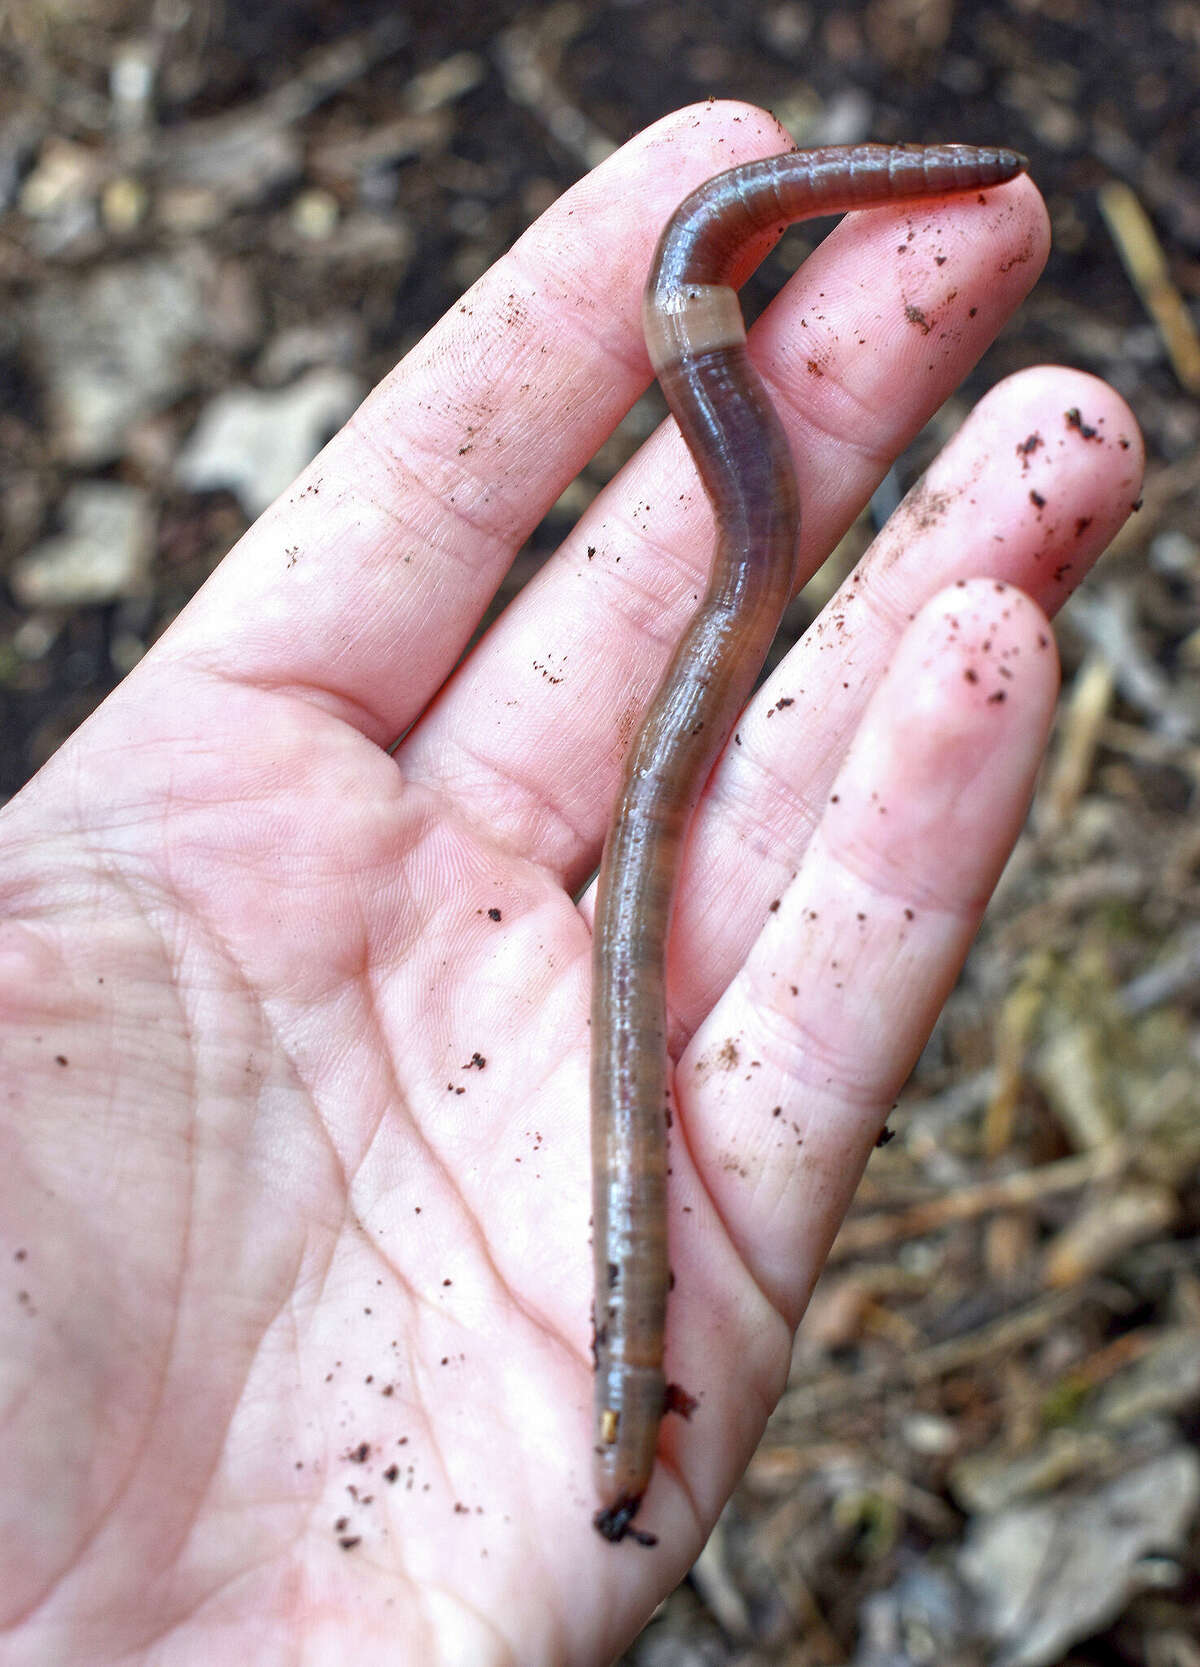 Asian jumping worms are distinguished from other earthworms by the presence of a creamy gray or white band encircling its body.